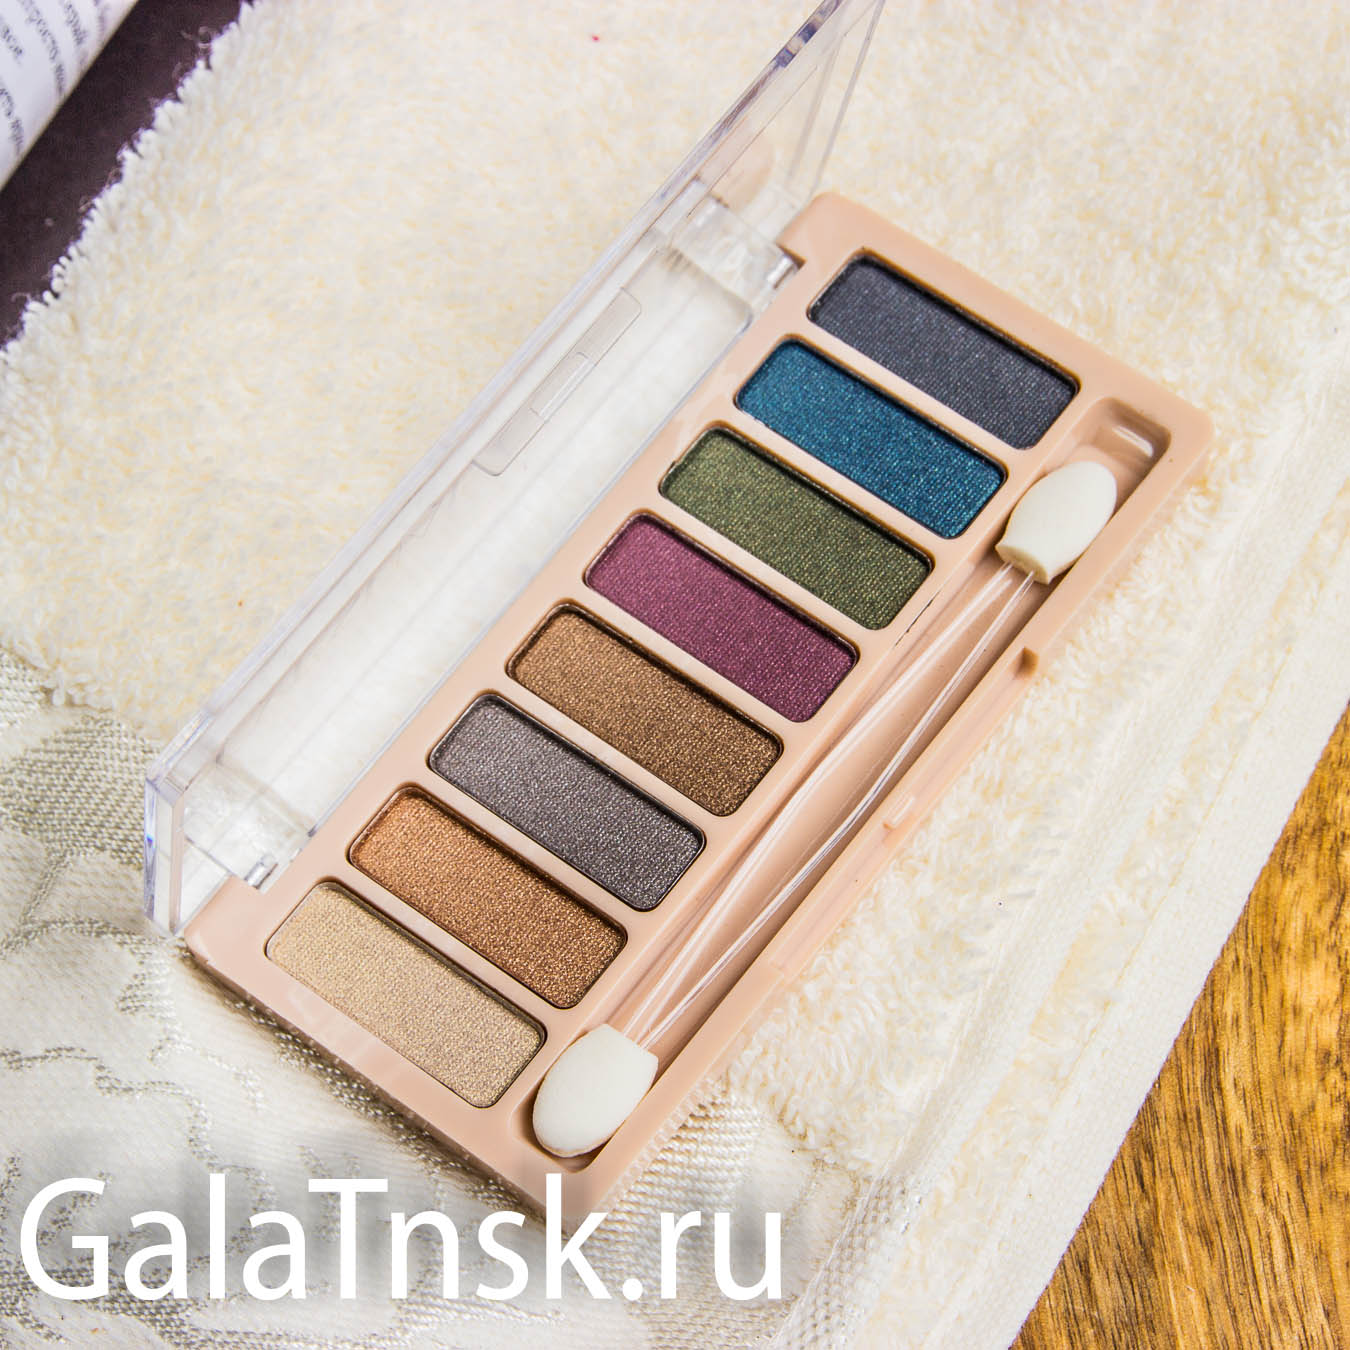 DO DO GIPL Тени DELICATE AND DOCILE 8colors D3143 04